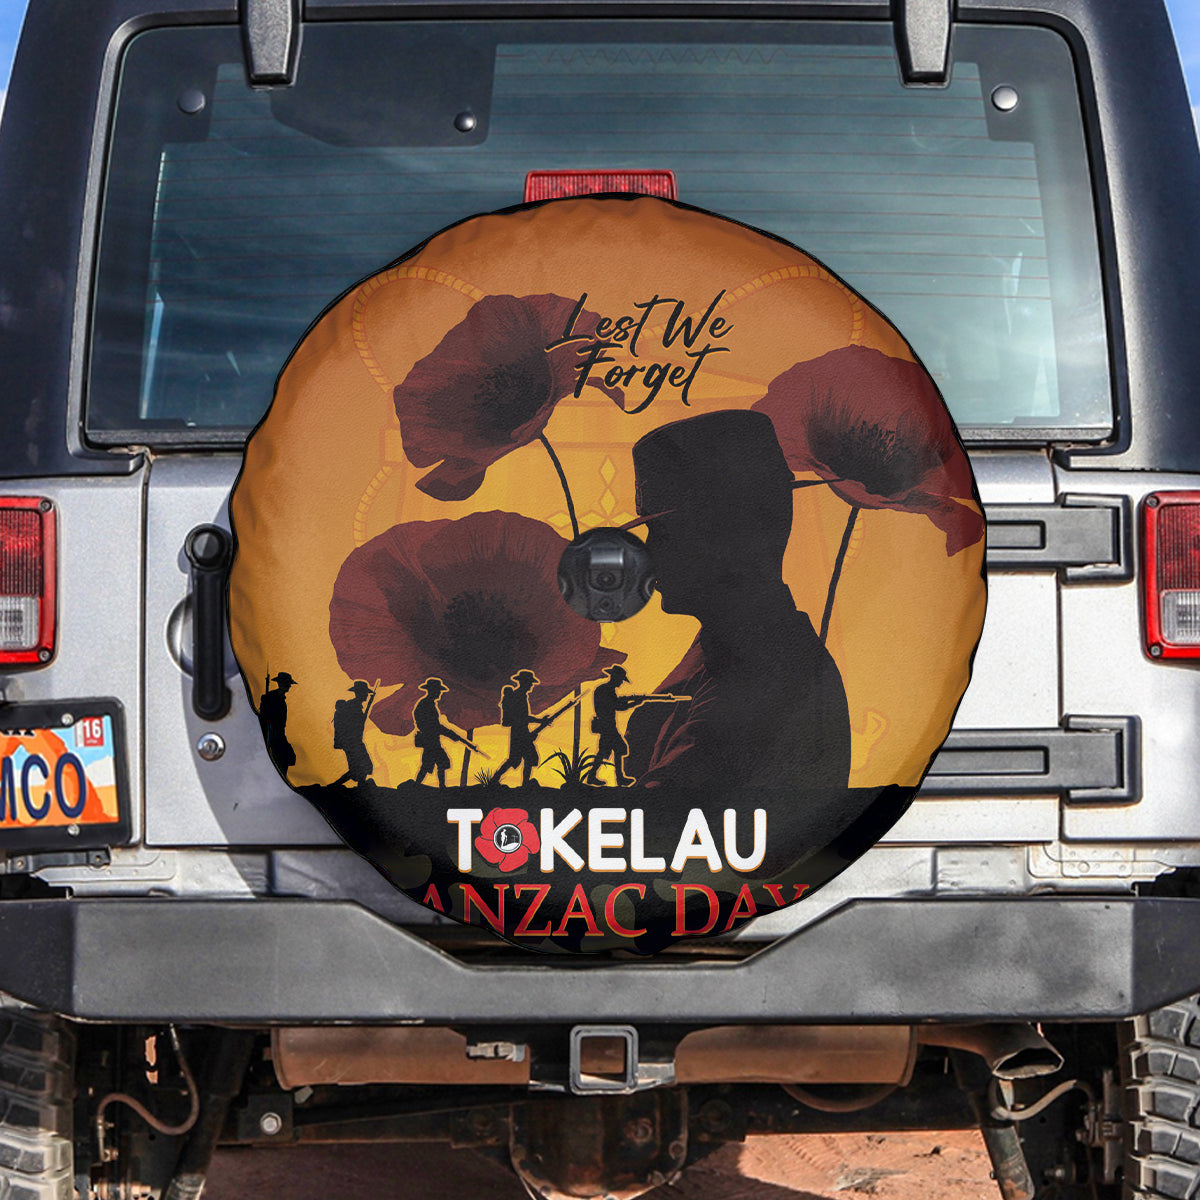 Tokelau ANZAC Day Spare Tire Cover Camouflage With Poppies Lest We Forget LT14 Yellow - Polynesian Pride